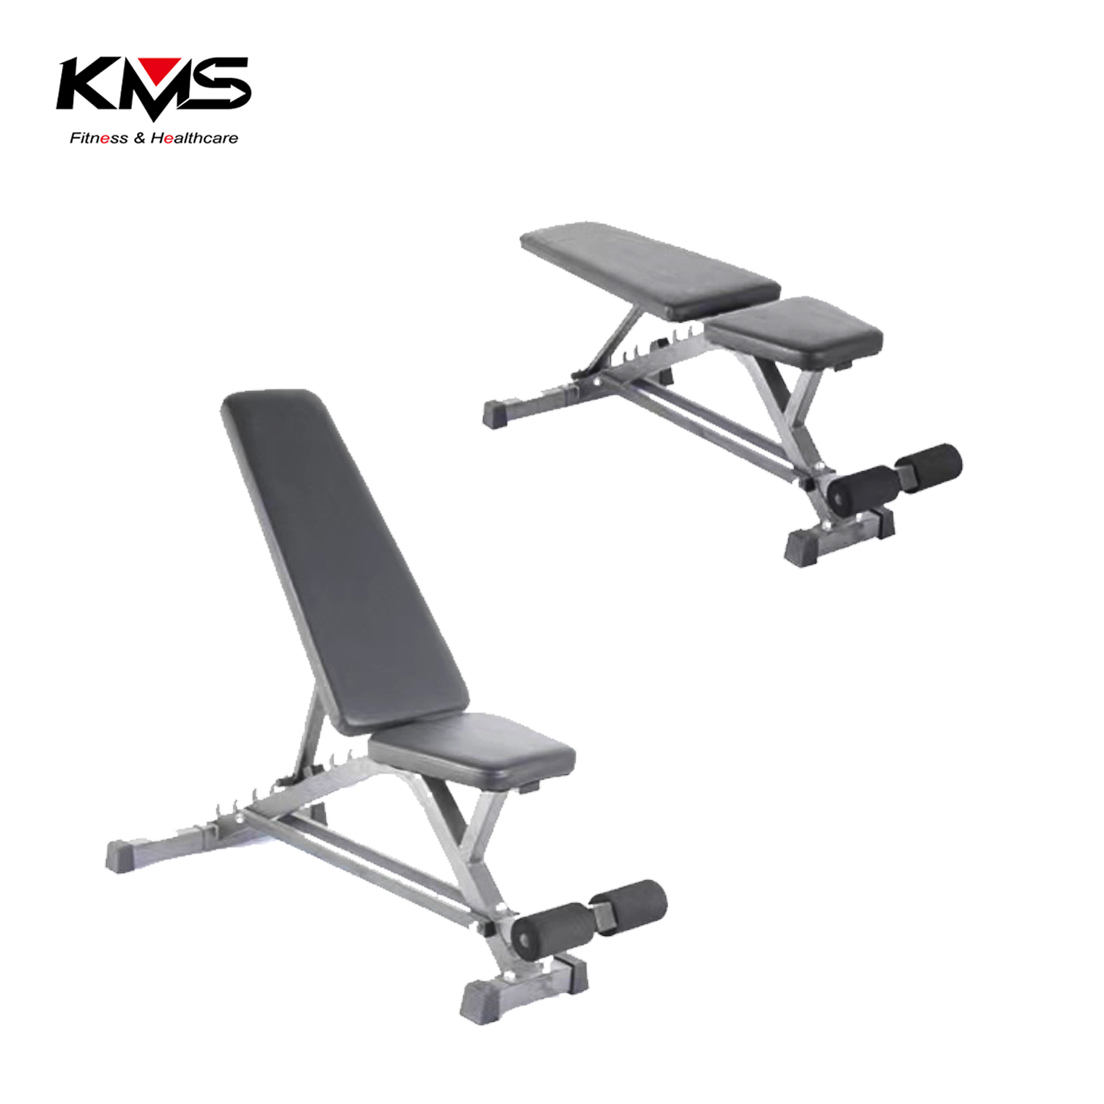 Adjustable Weight Bench, Foldable Workout Benches for Home Gym